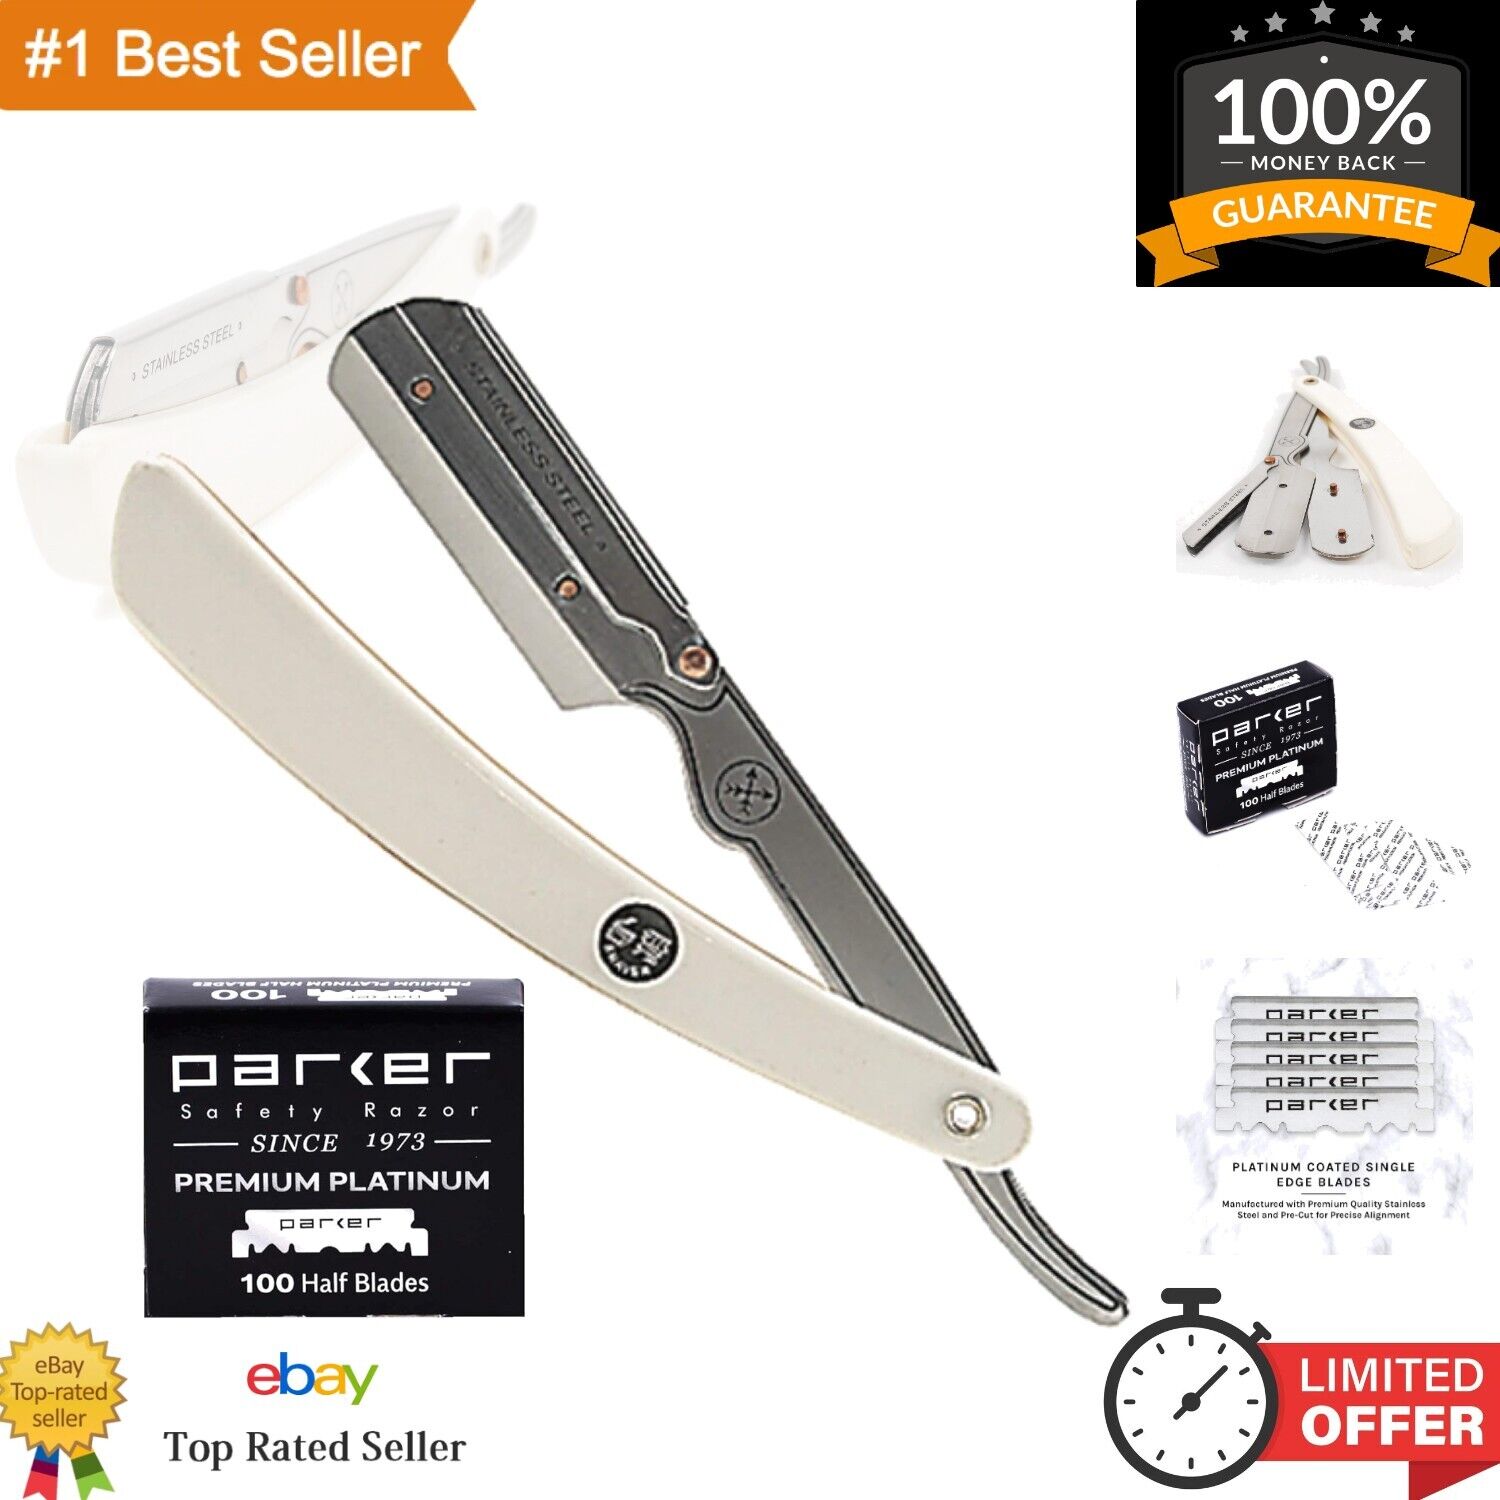 Professional Straight Edge Barber Razor with 100 Platinum Stainless Steel Blades